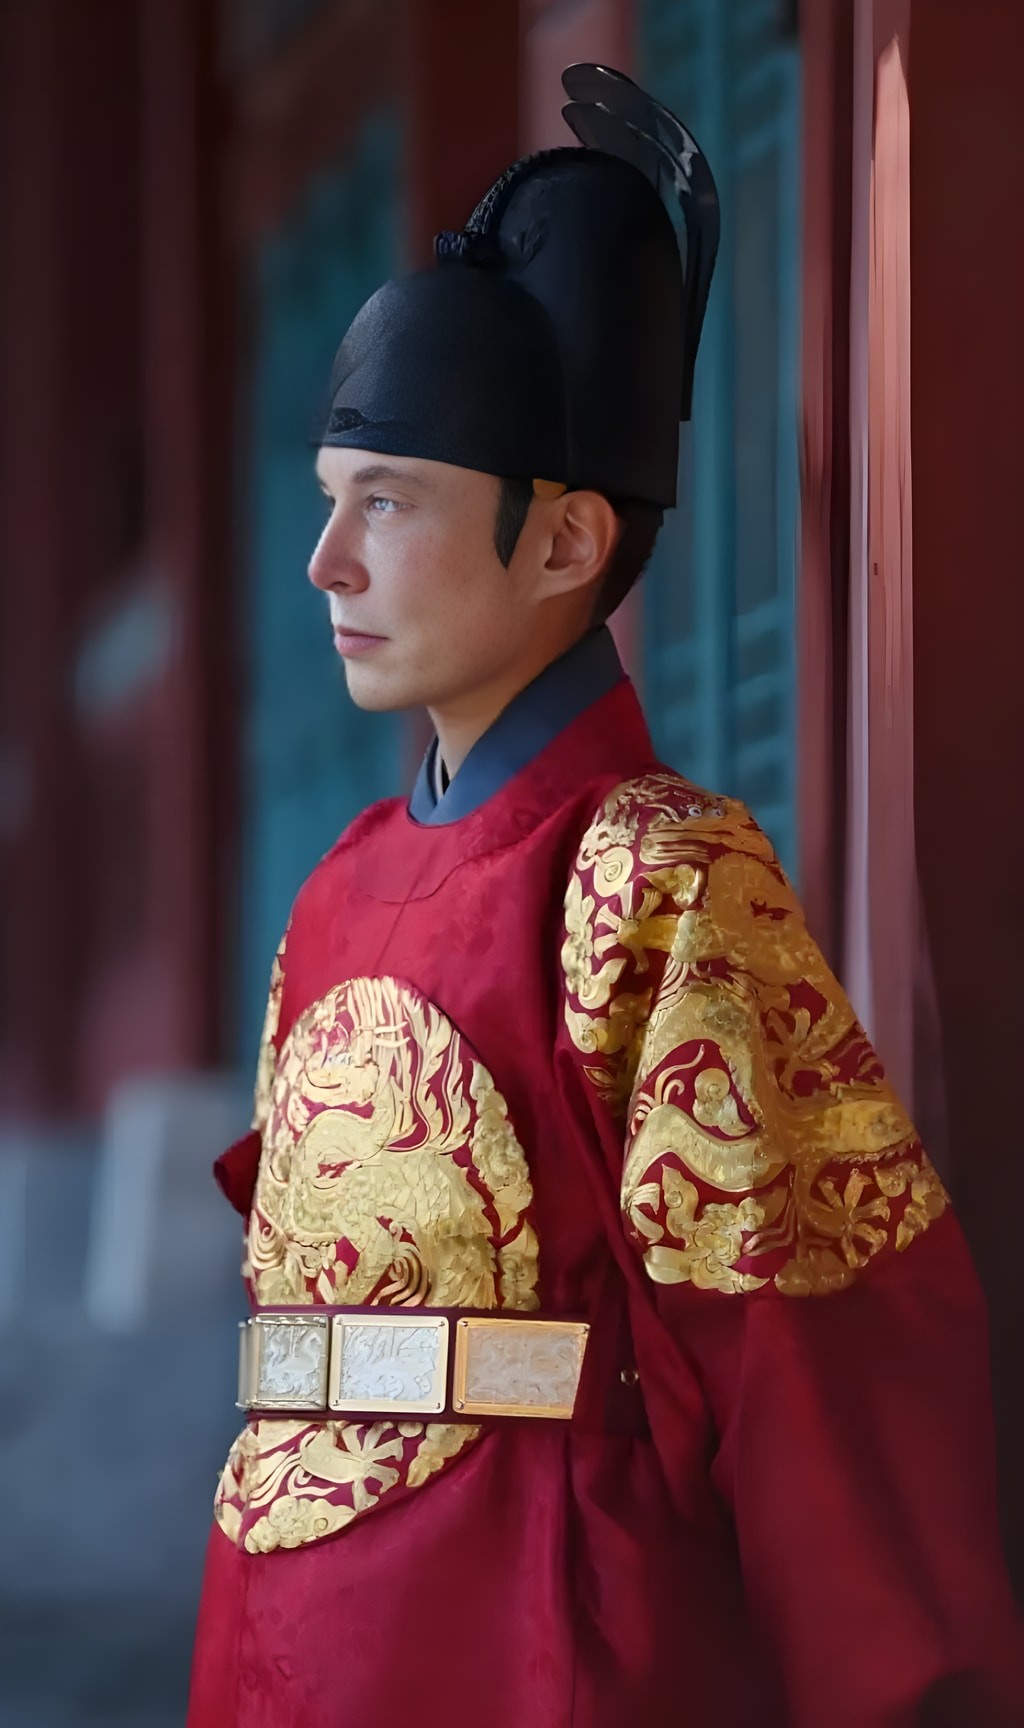 in traditional chinese clothing is standing in front of a building